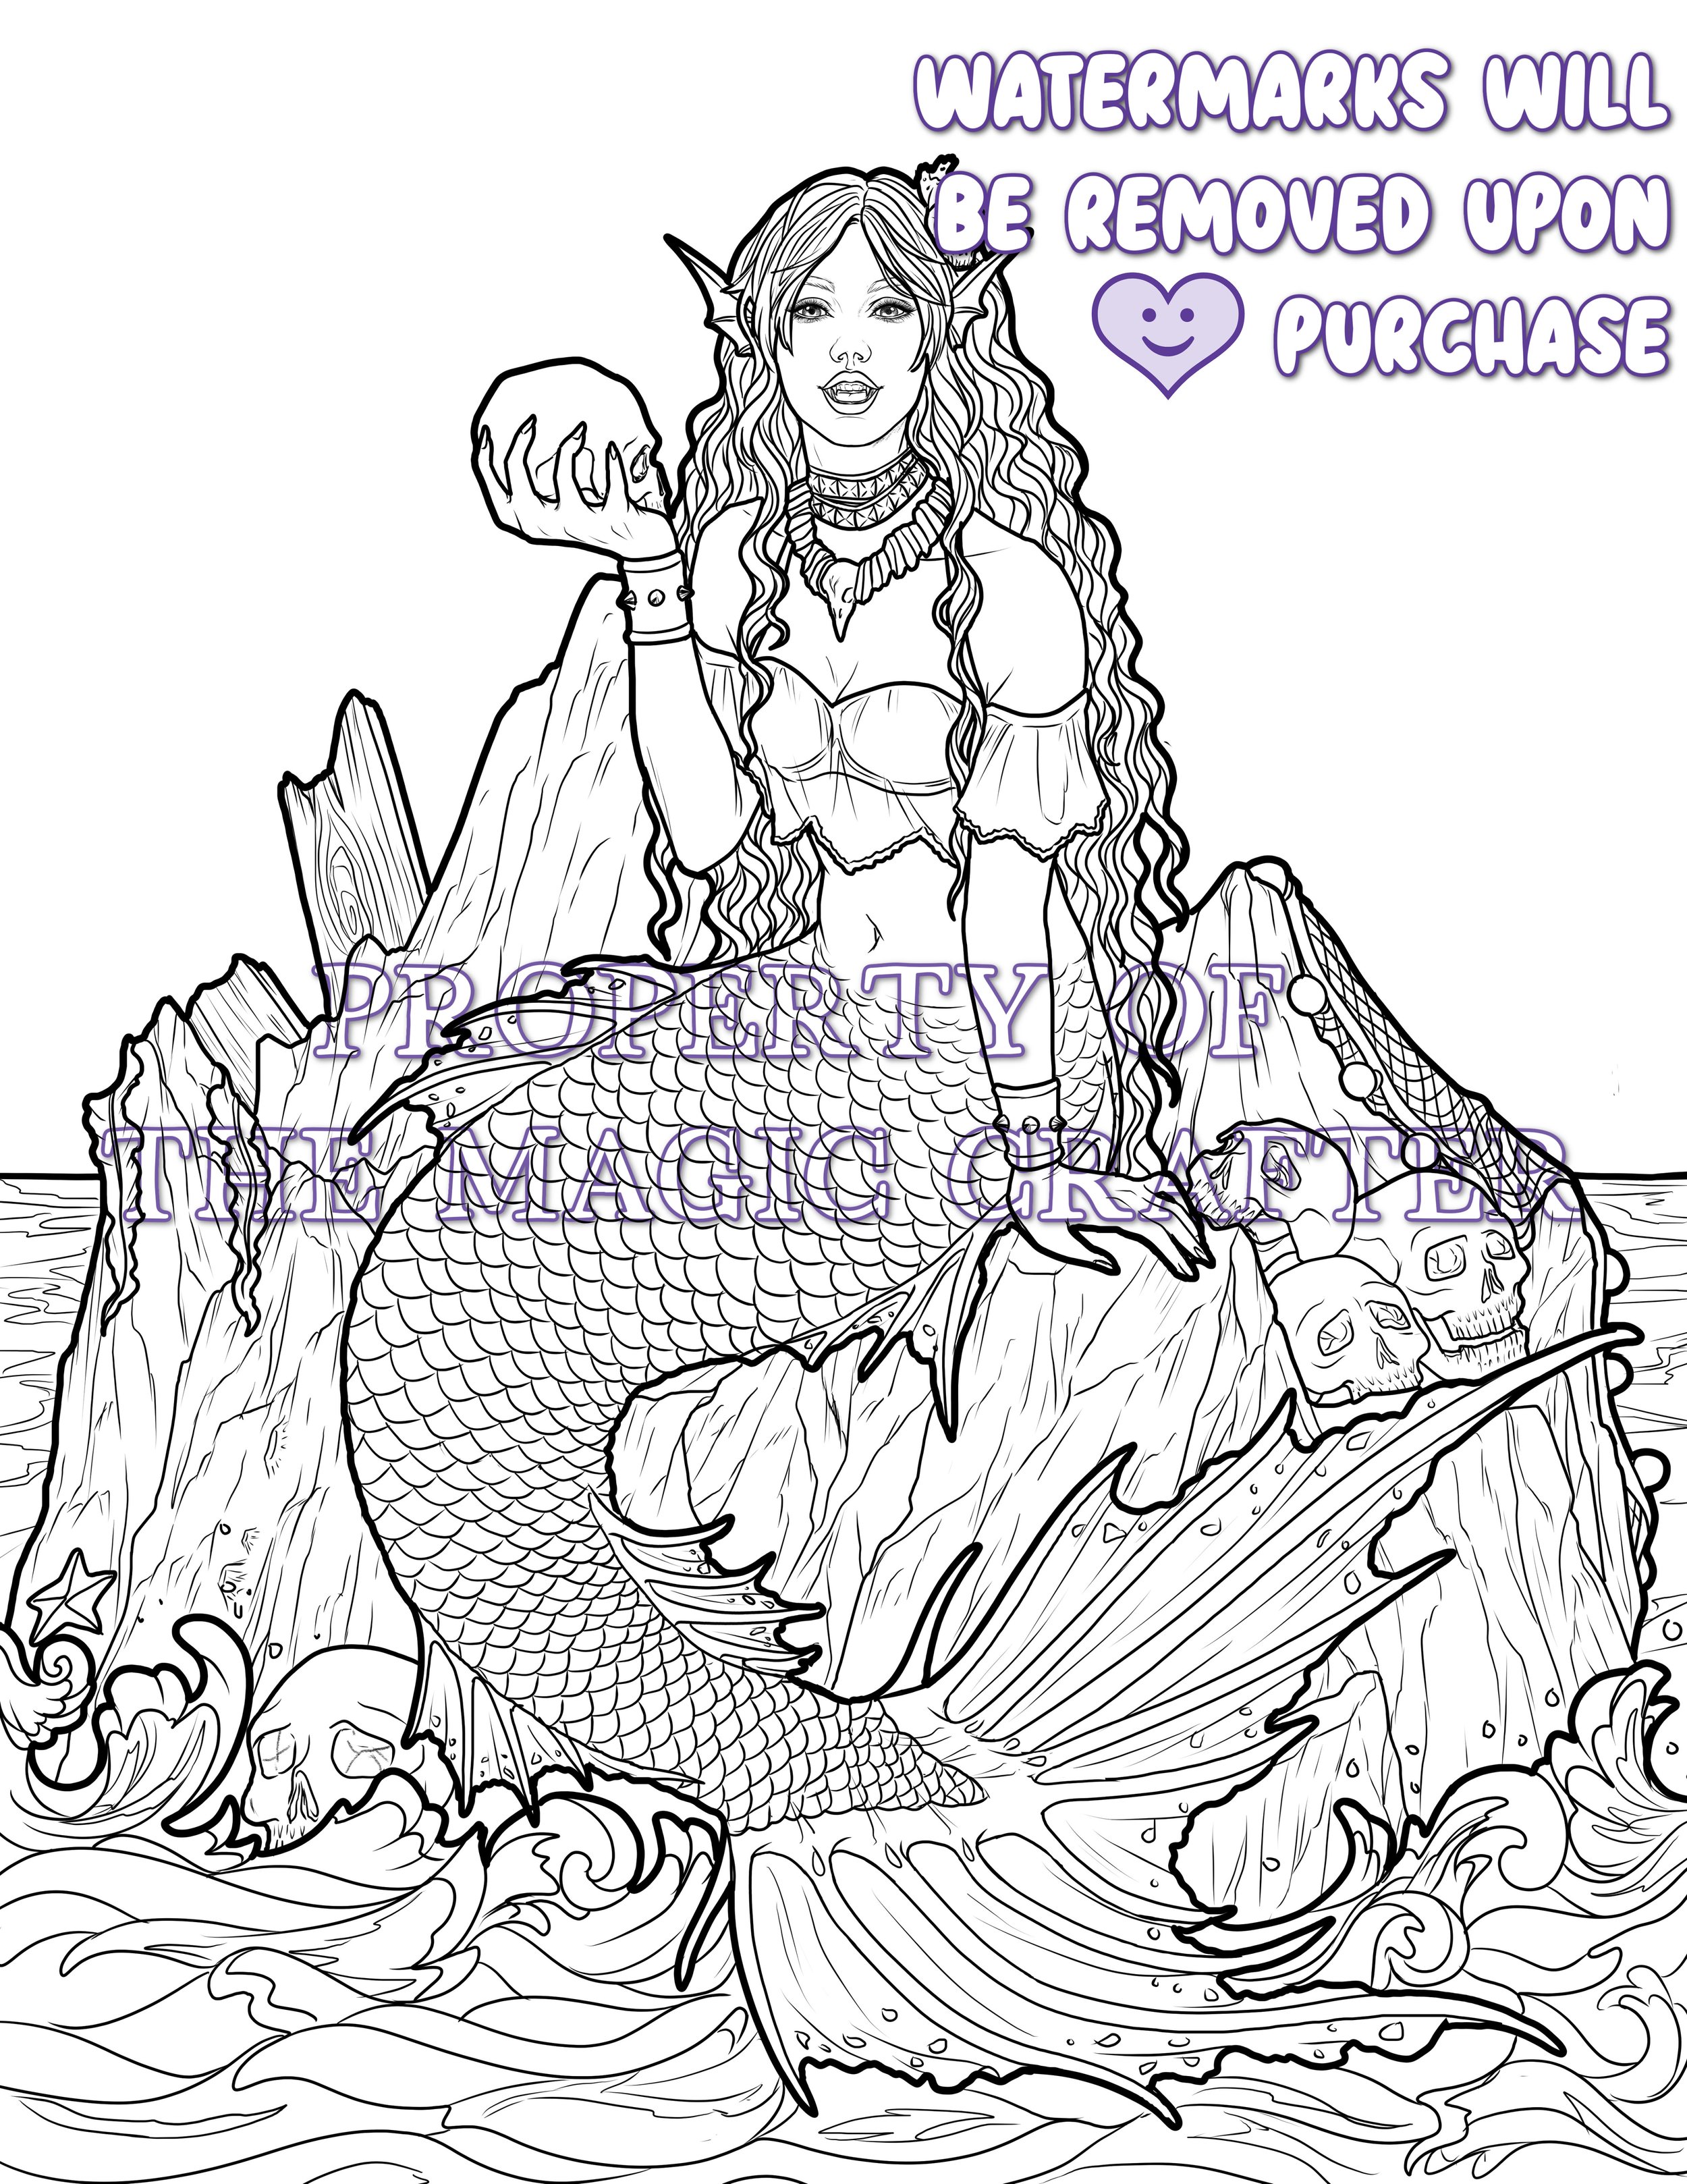 gothic siren coloring page - mermaid phantom color sheet from The Magic Crafter.jpg